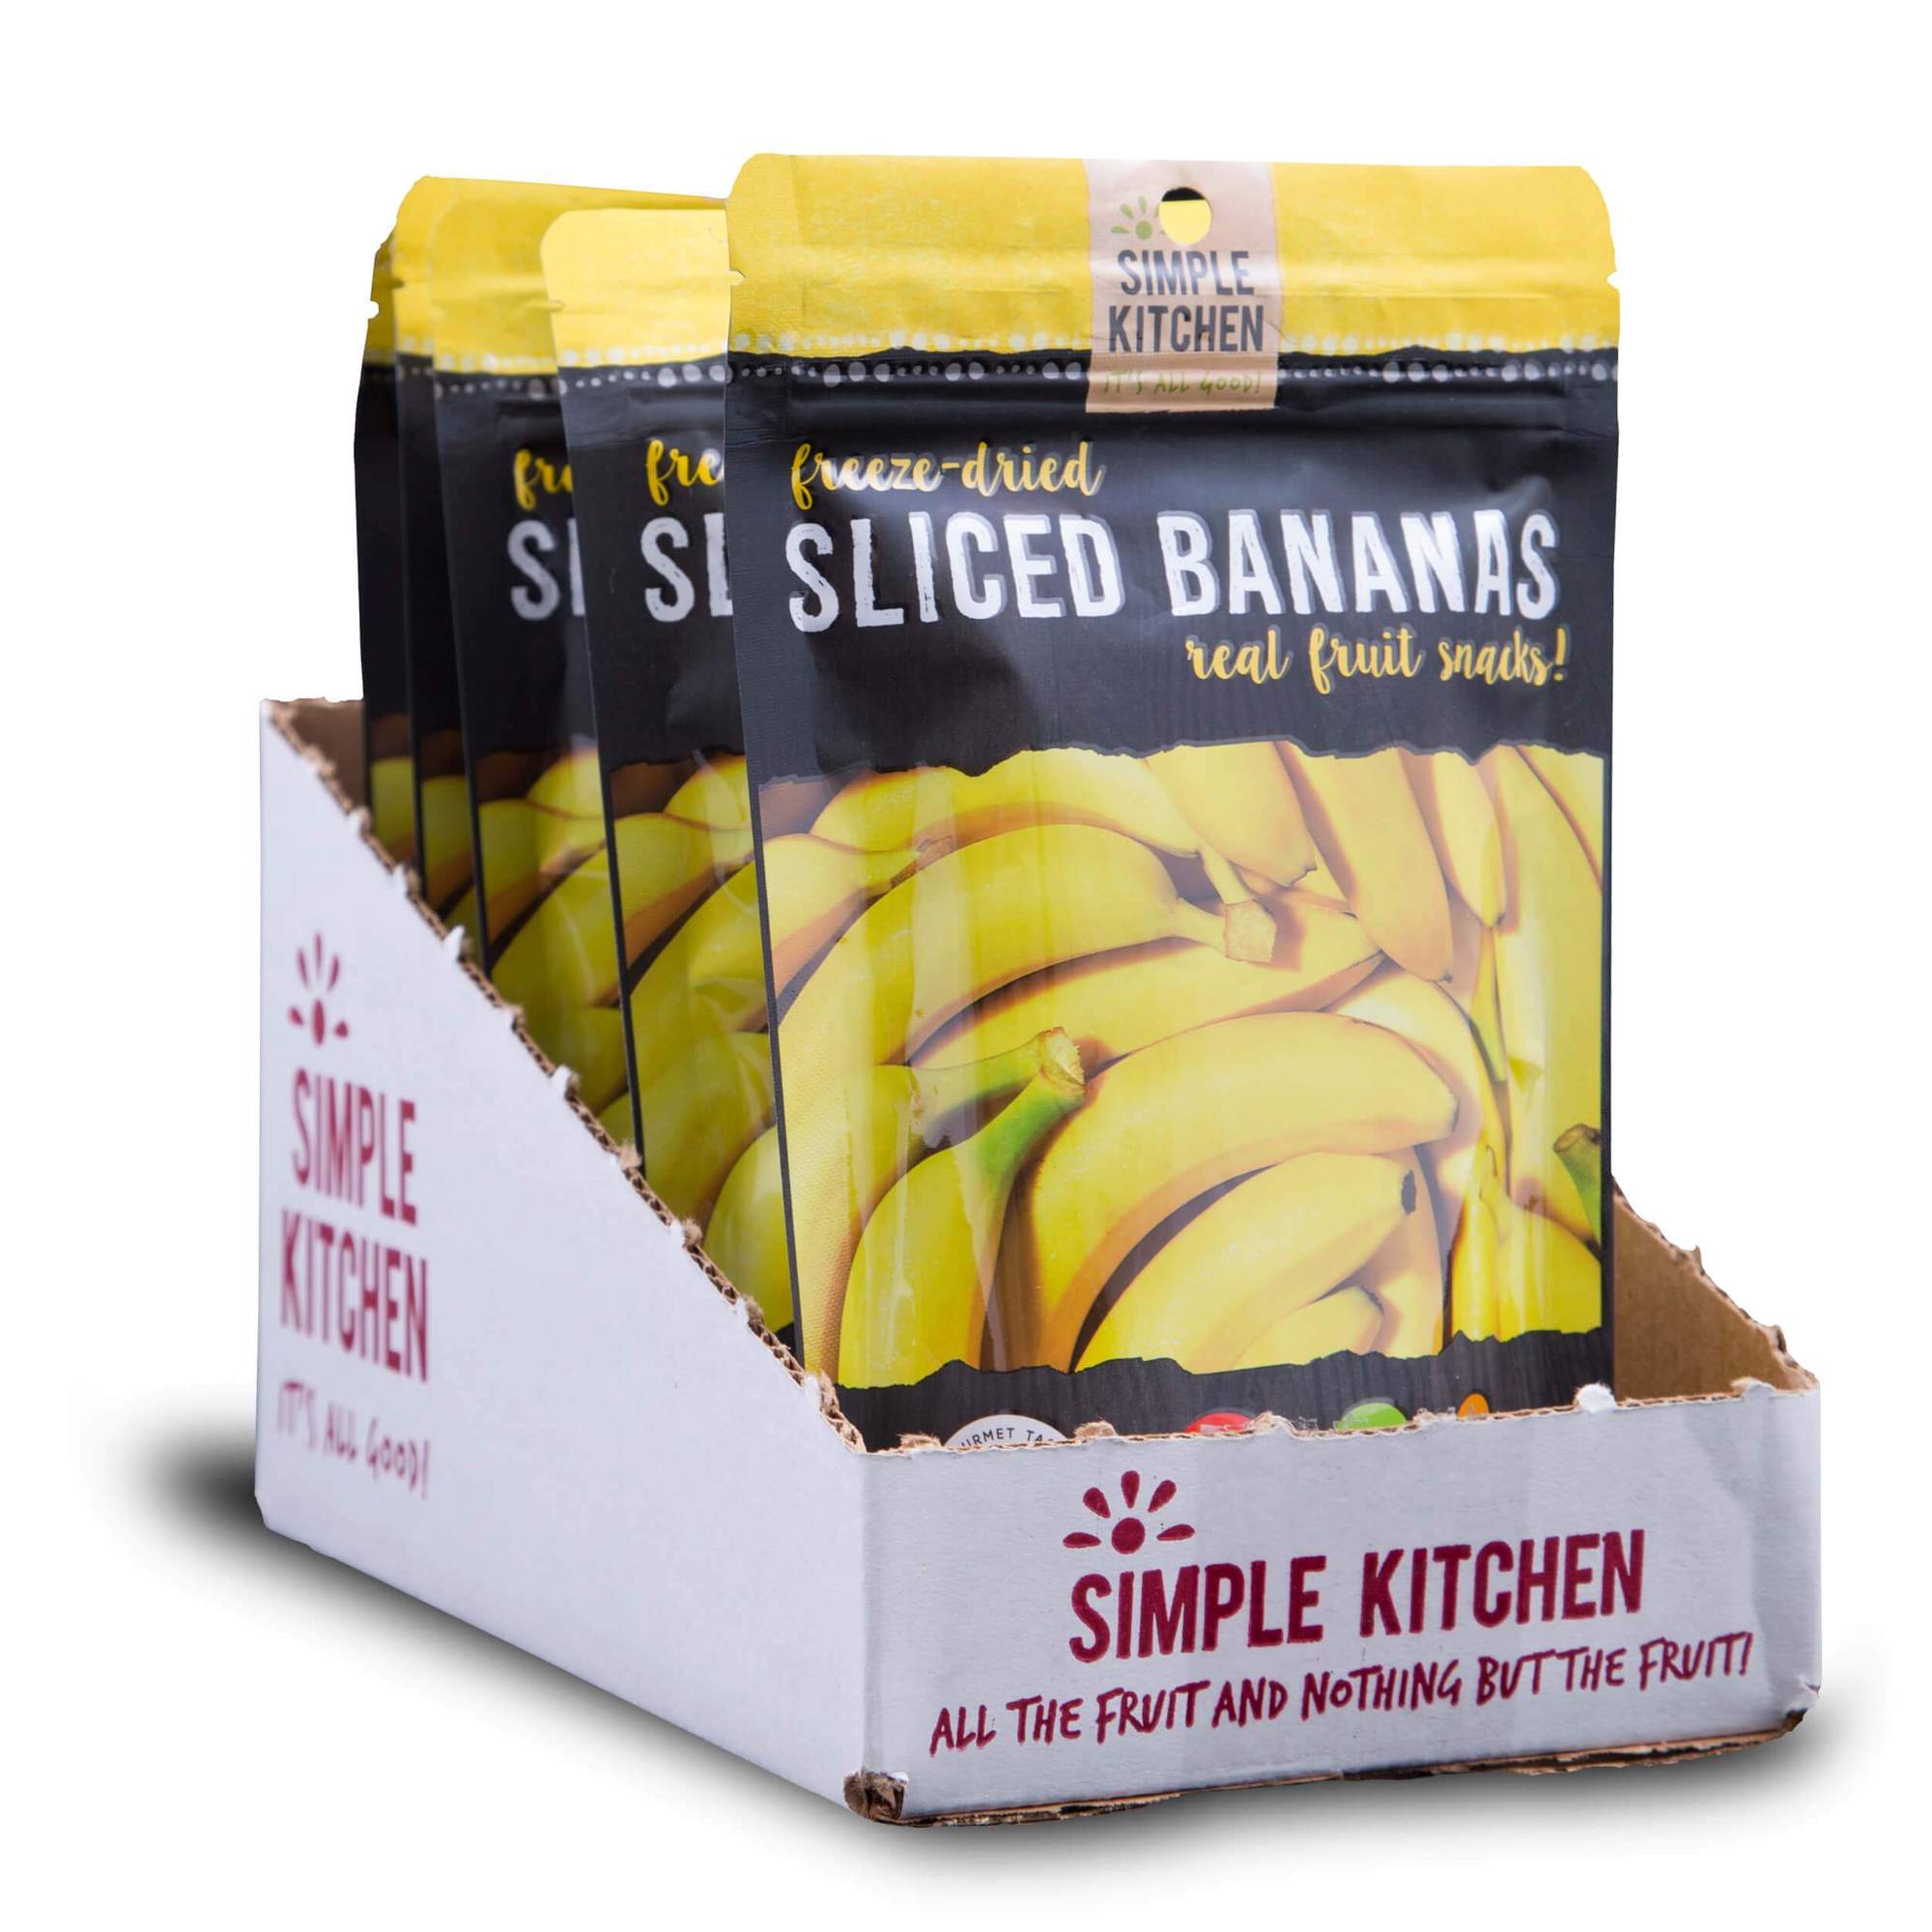 ReadyWise (formerly Wise Food Storage) Freeze-Dried Bananas in a box on a white background.